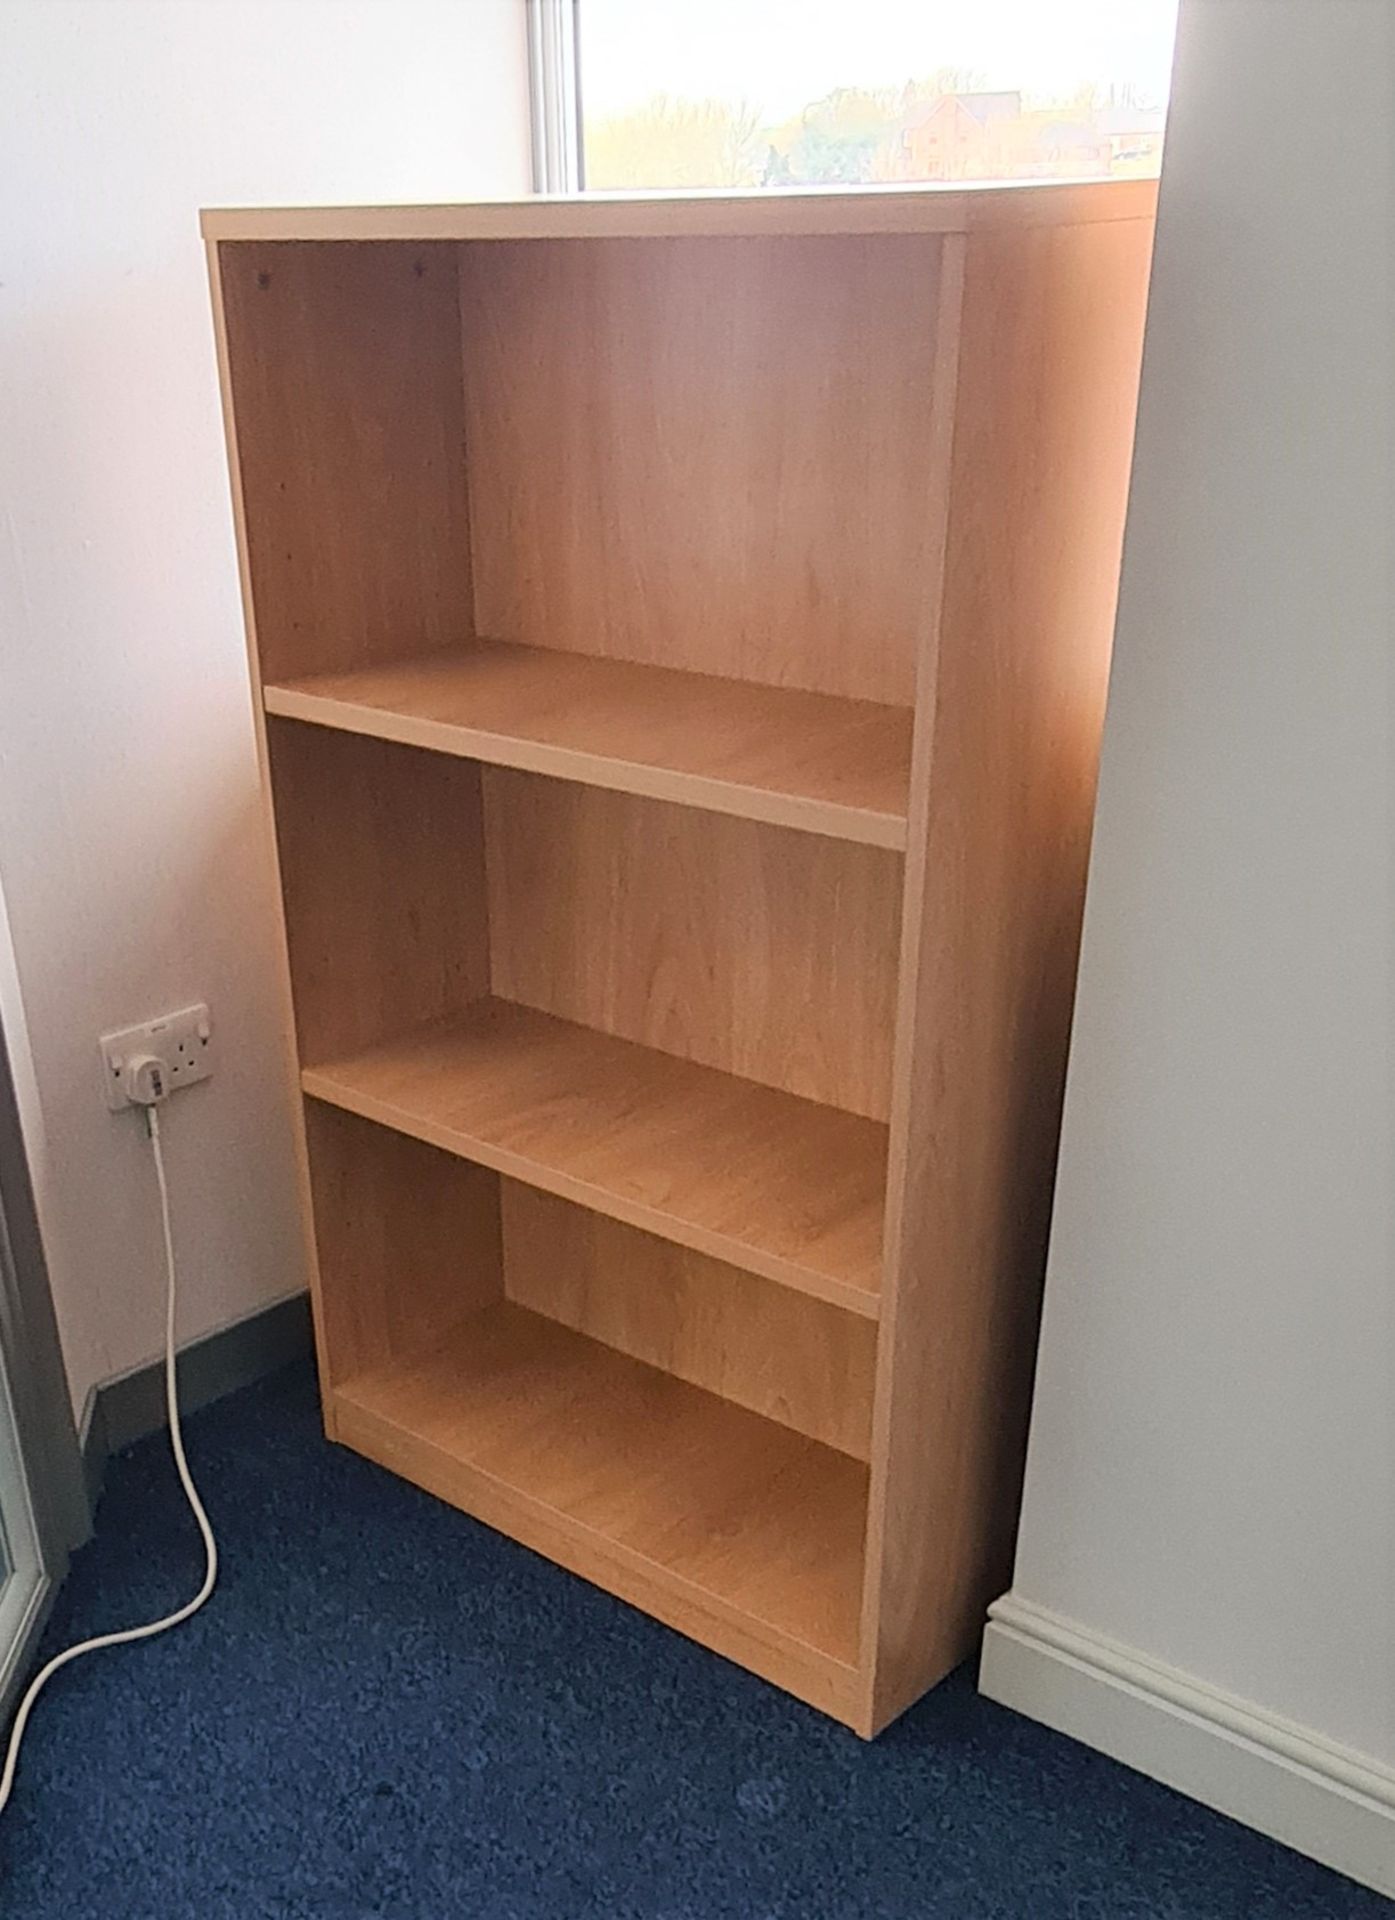 1 x Medium Office Bookcase With a Beech Finish - Ref: 1 x PK009 - Location: Site 2, Stafford,